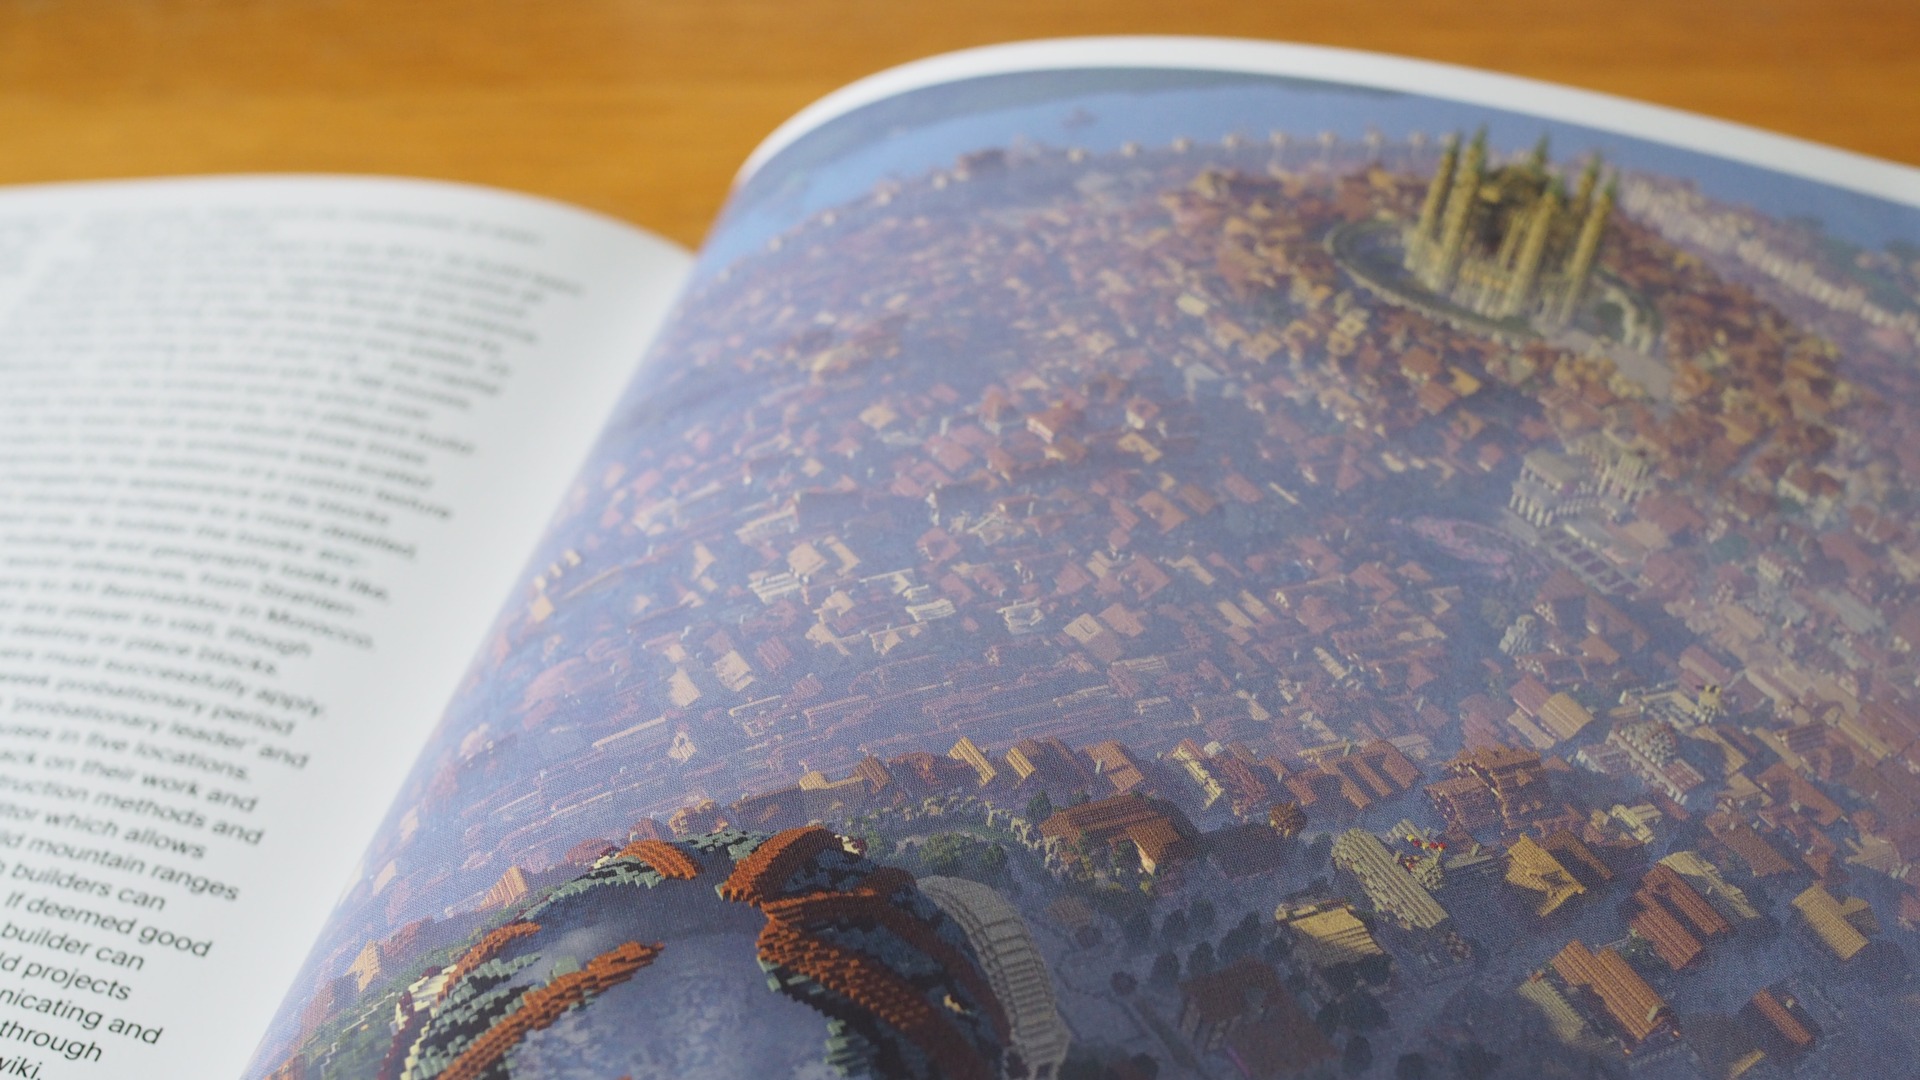 A photograph of pages in the book about WesterosCraft in the book Videogames: Design/Play/Disrupt.